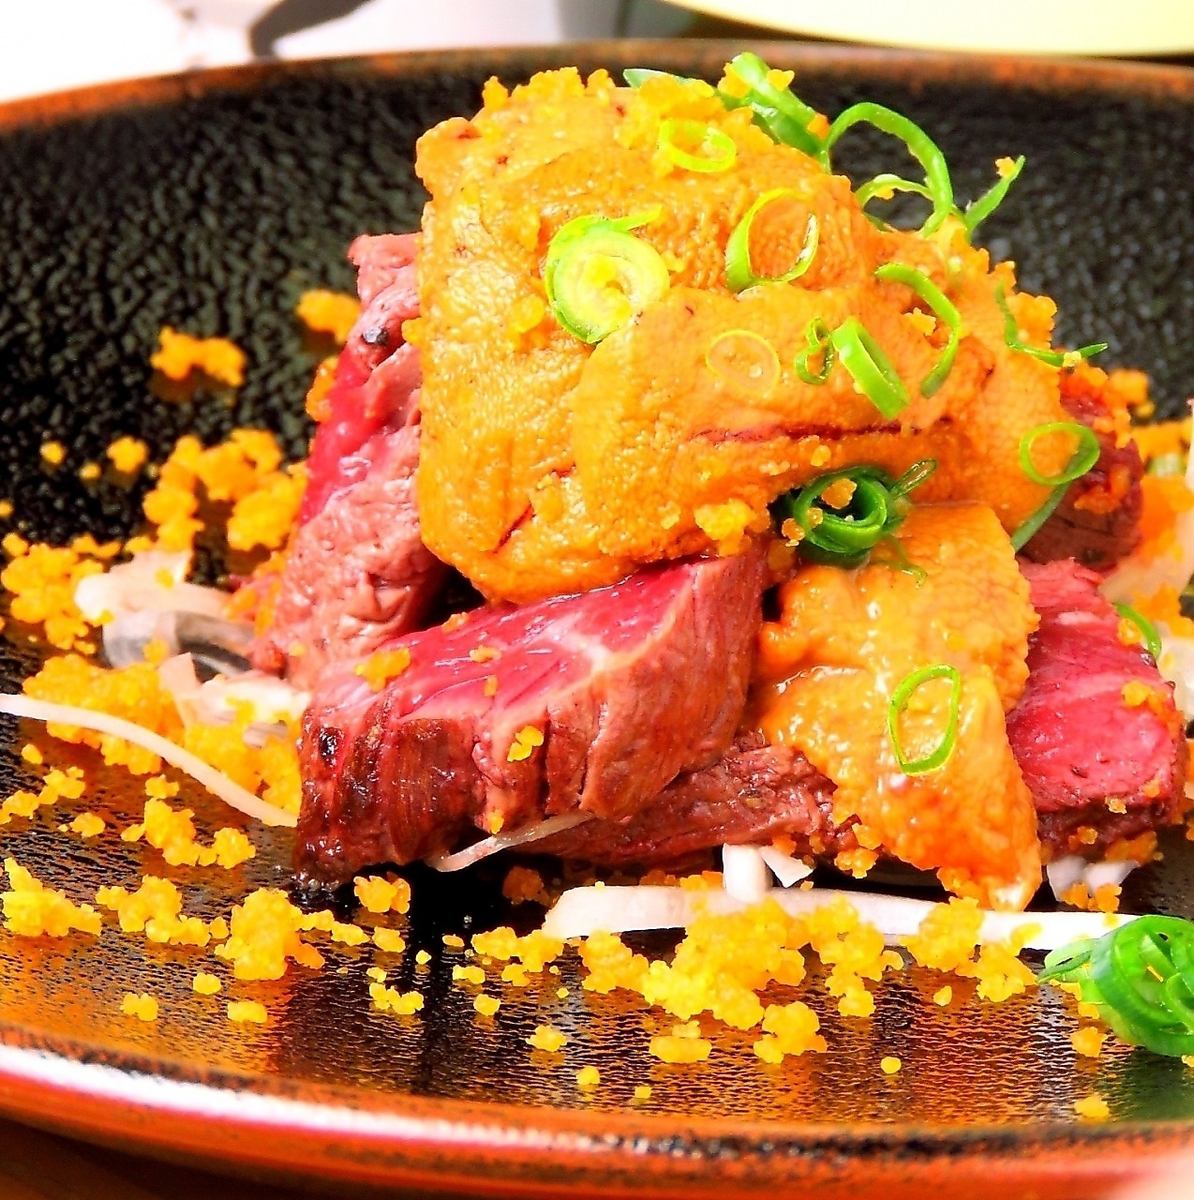 Beef steak topped with sea urchin looks great♪Enjoy the meat at Meat Shokudo Onikai!